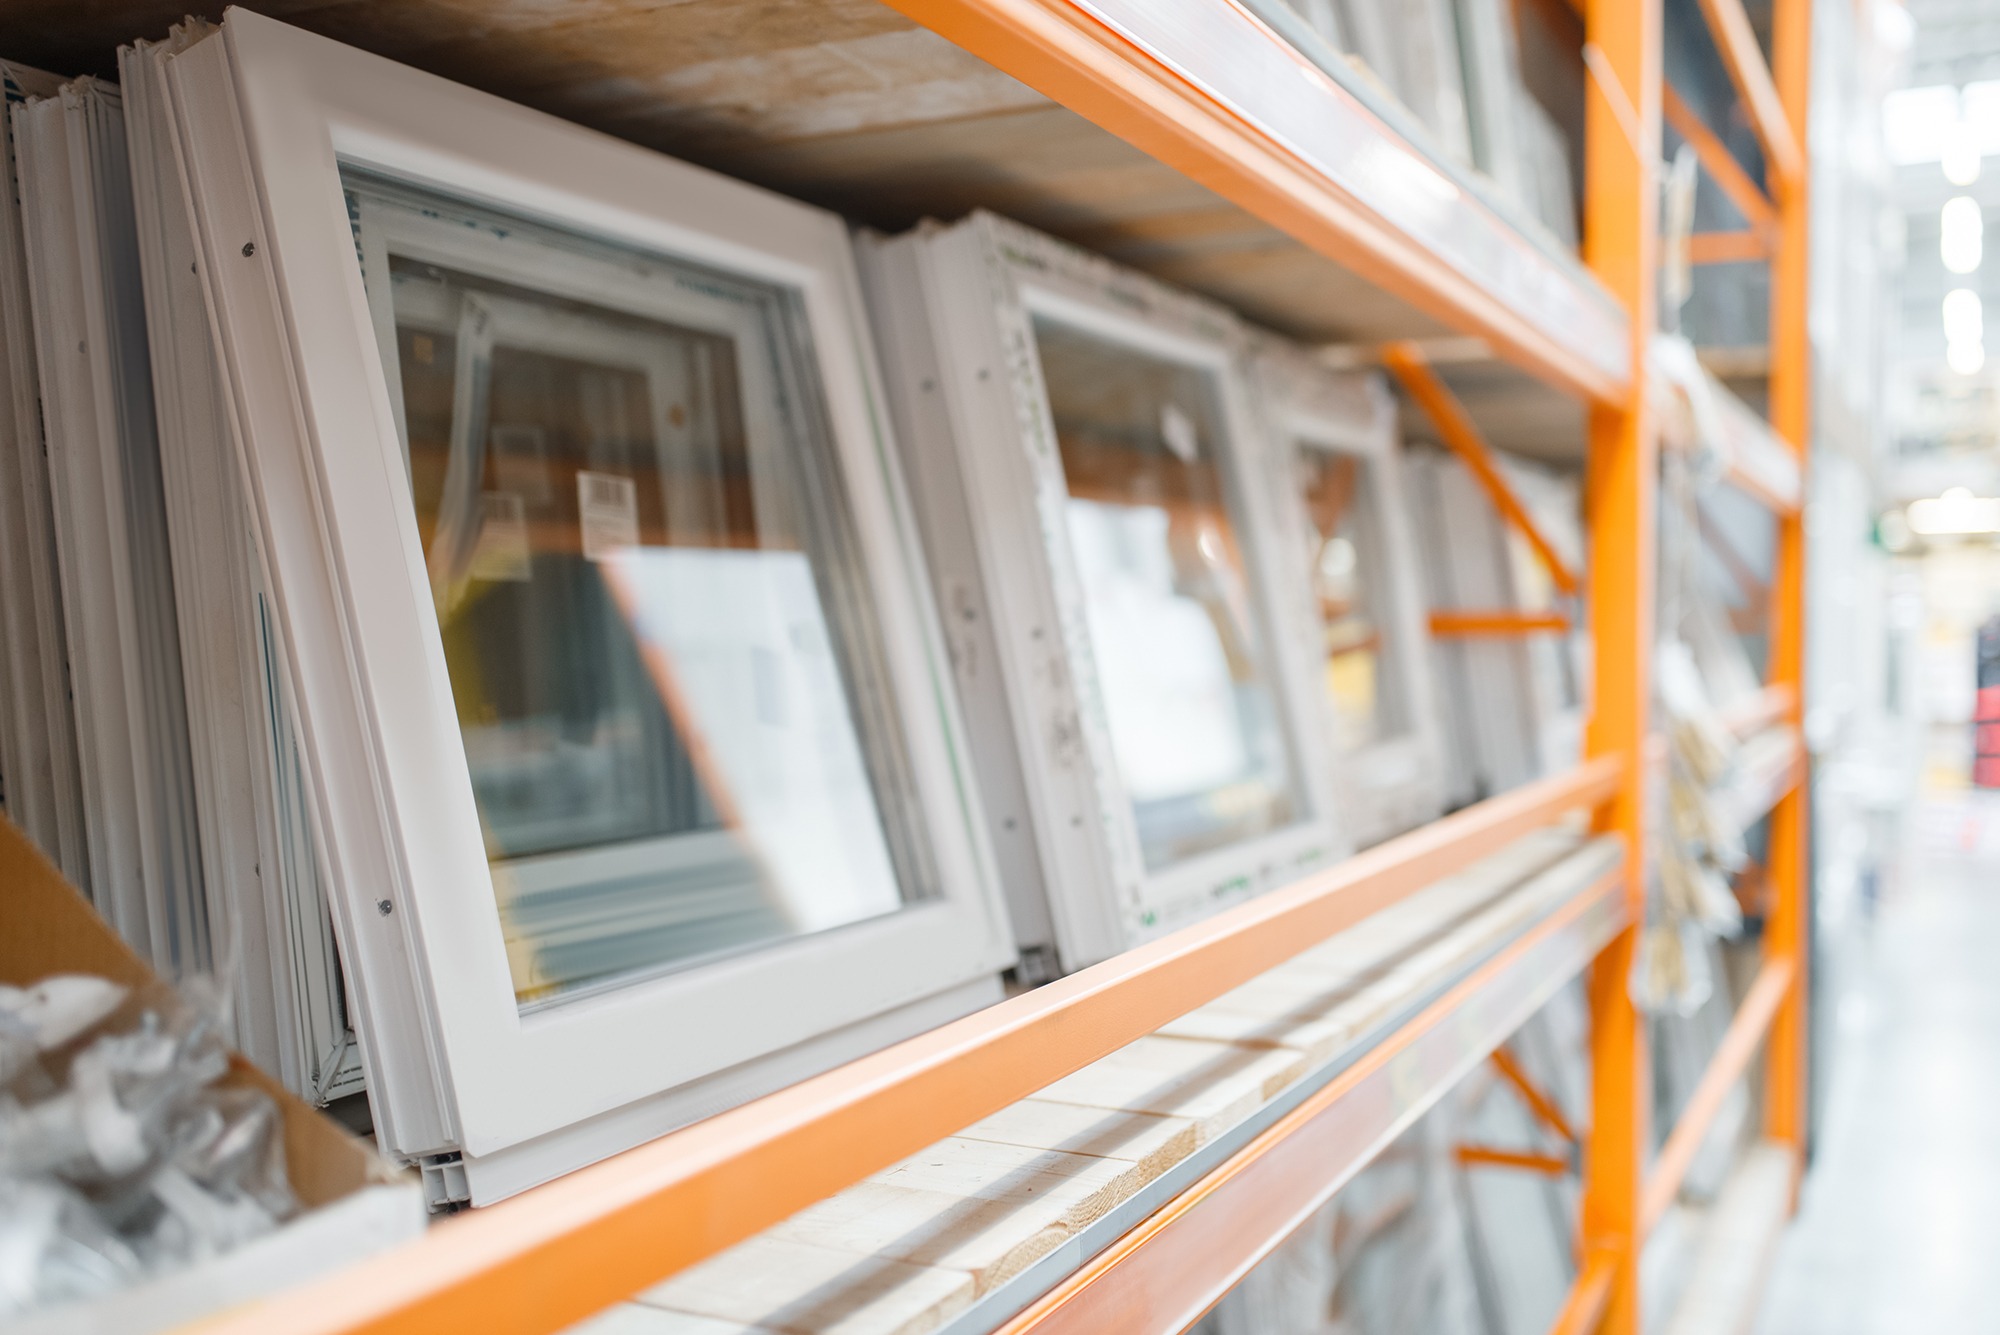 The Tremendous Benefits of Investing in Energy-Efficient Windows